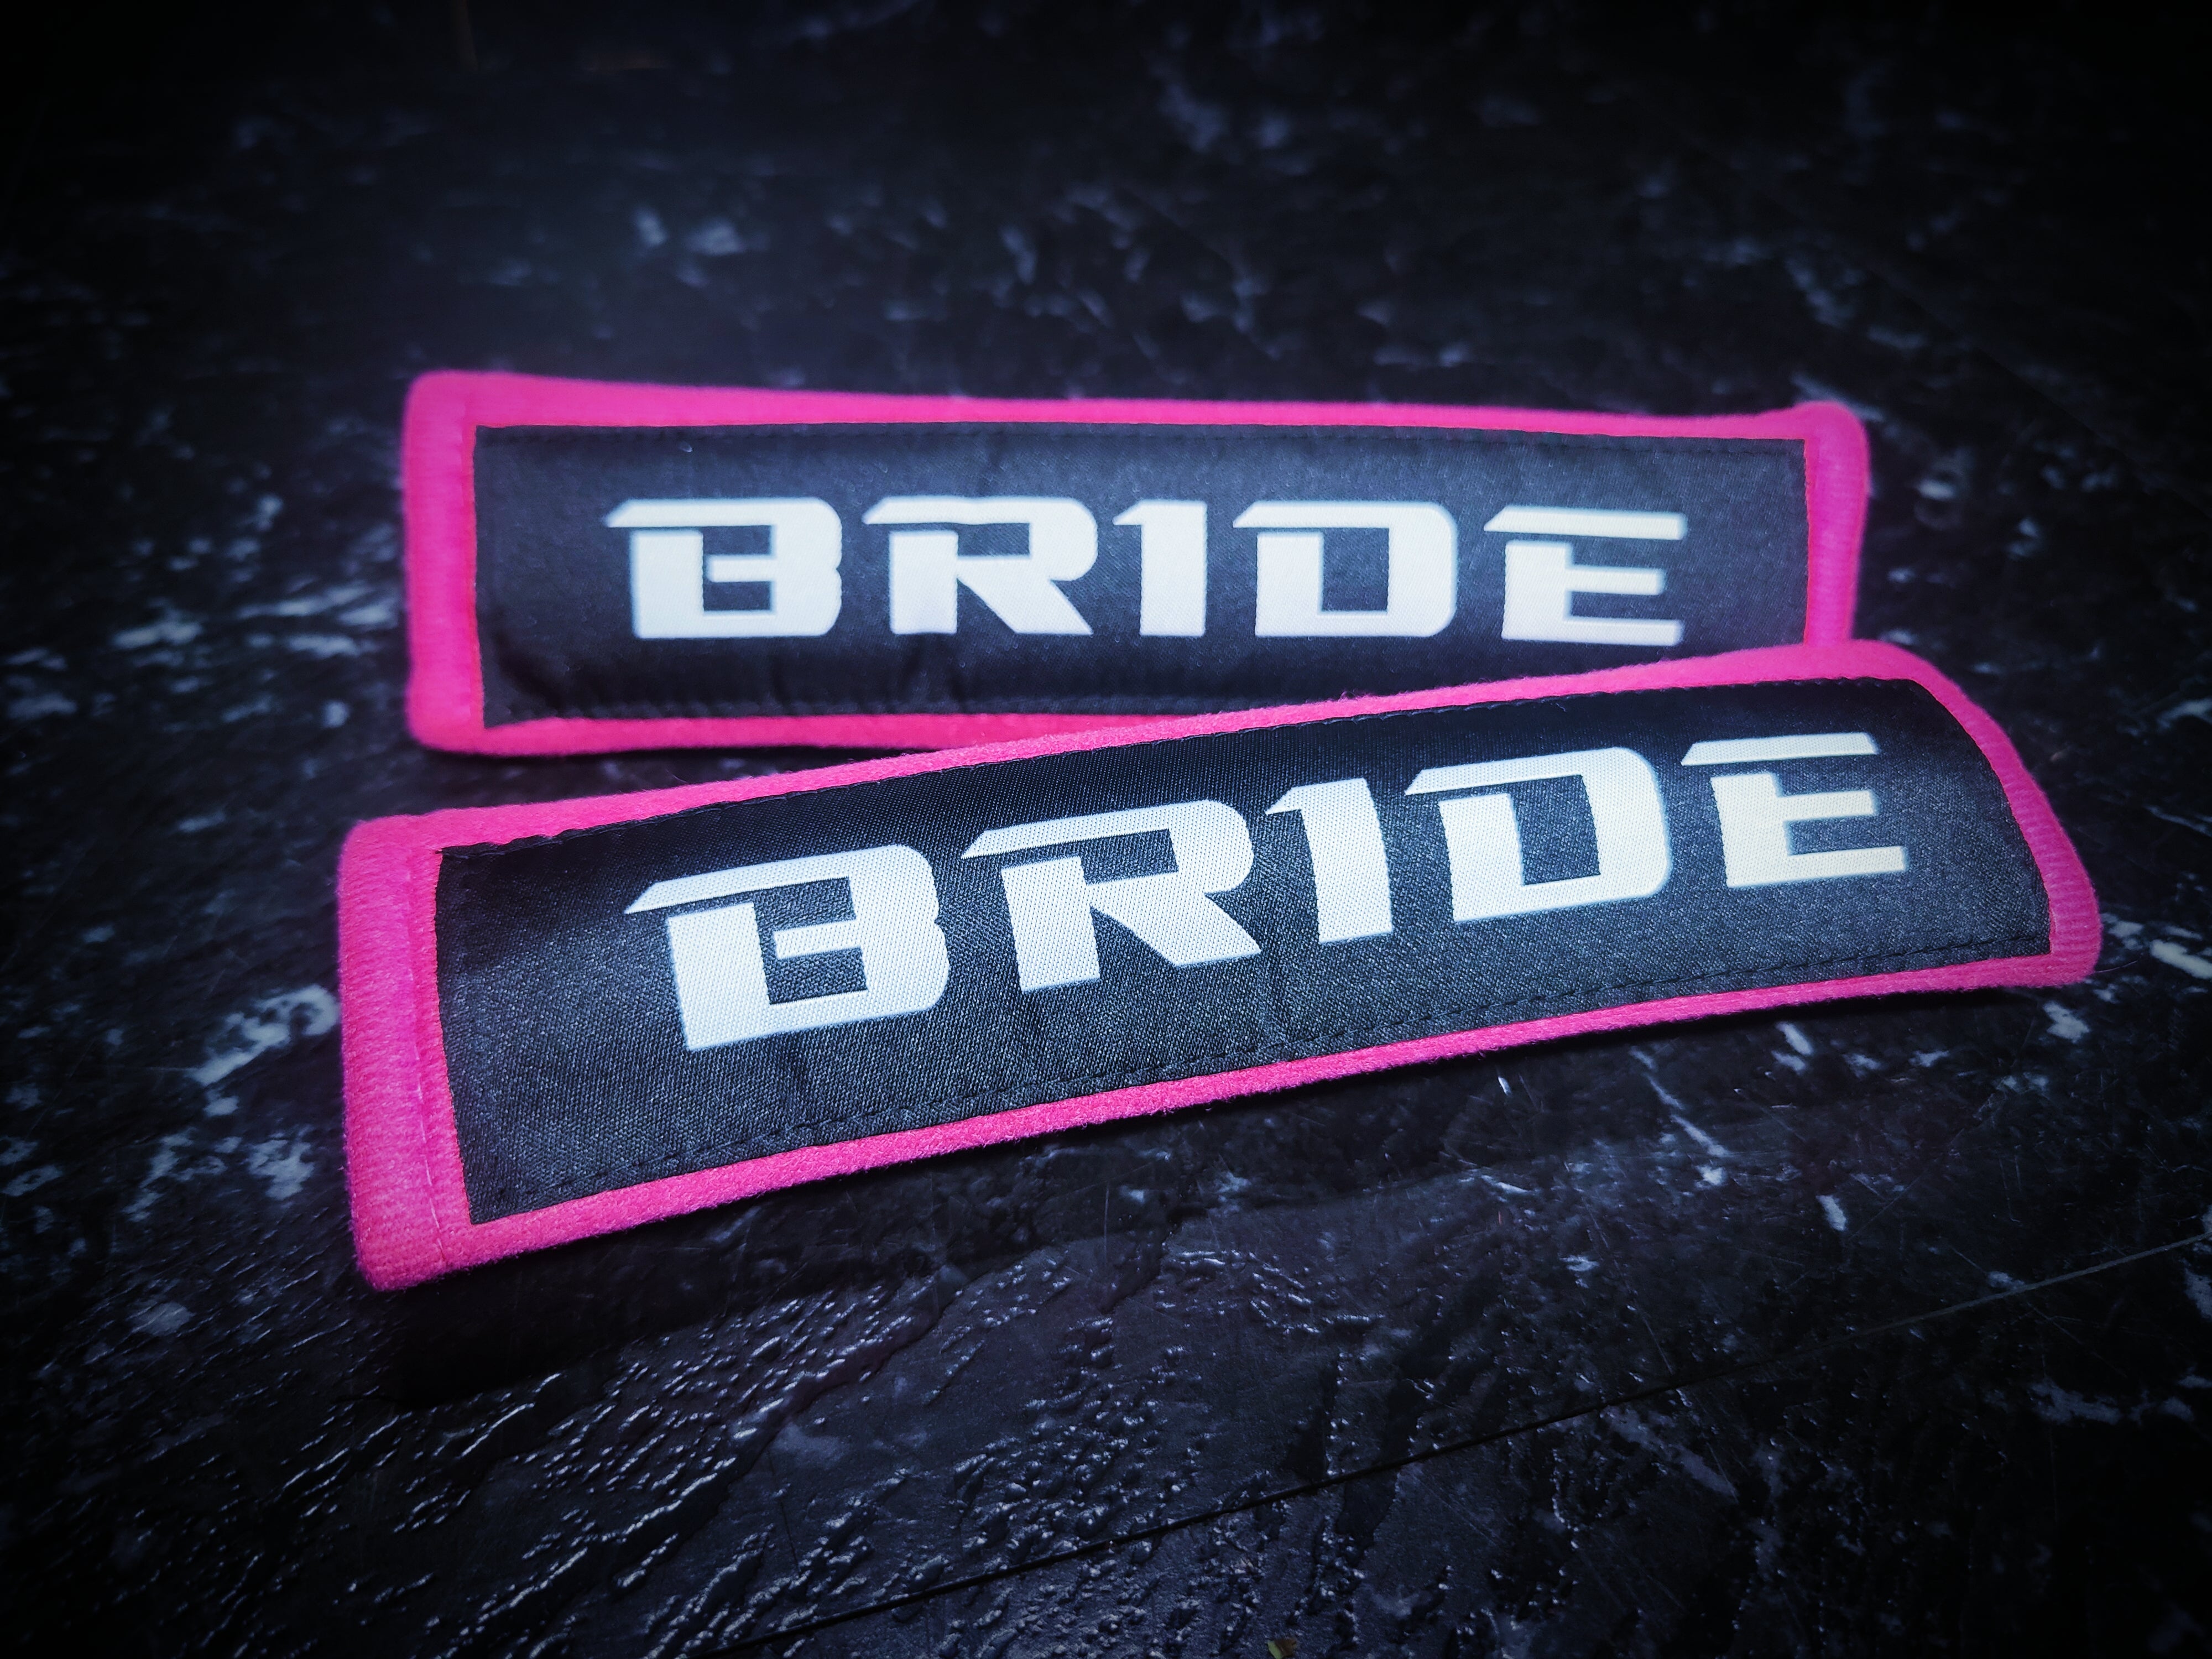 BRIDE Pink Seat Belt Covers